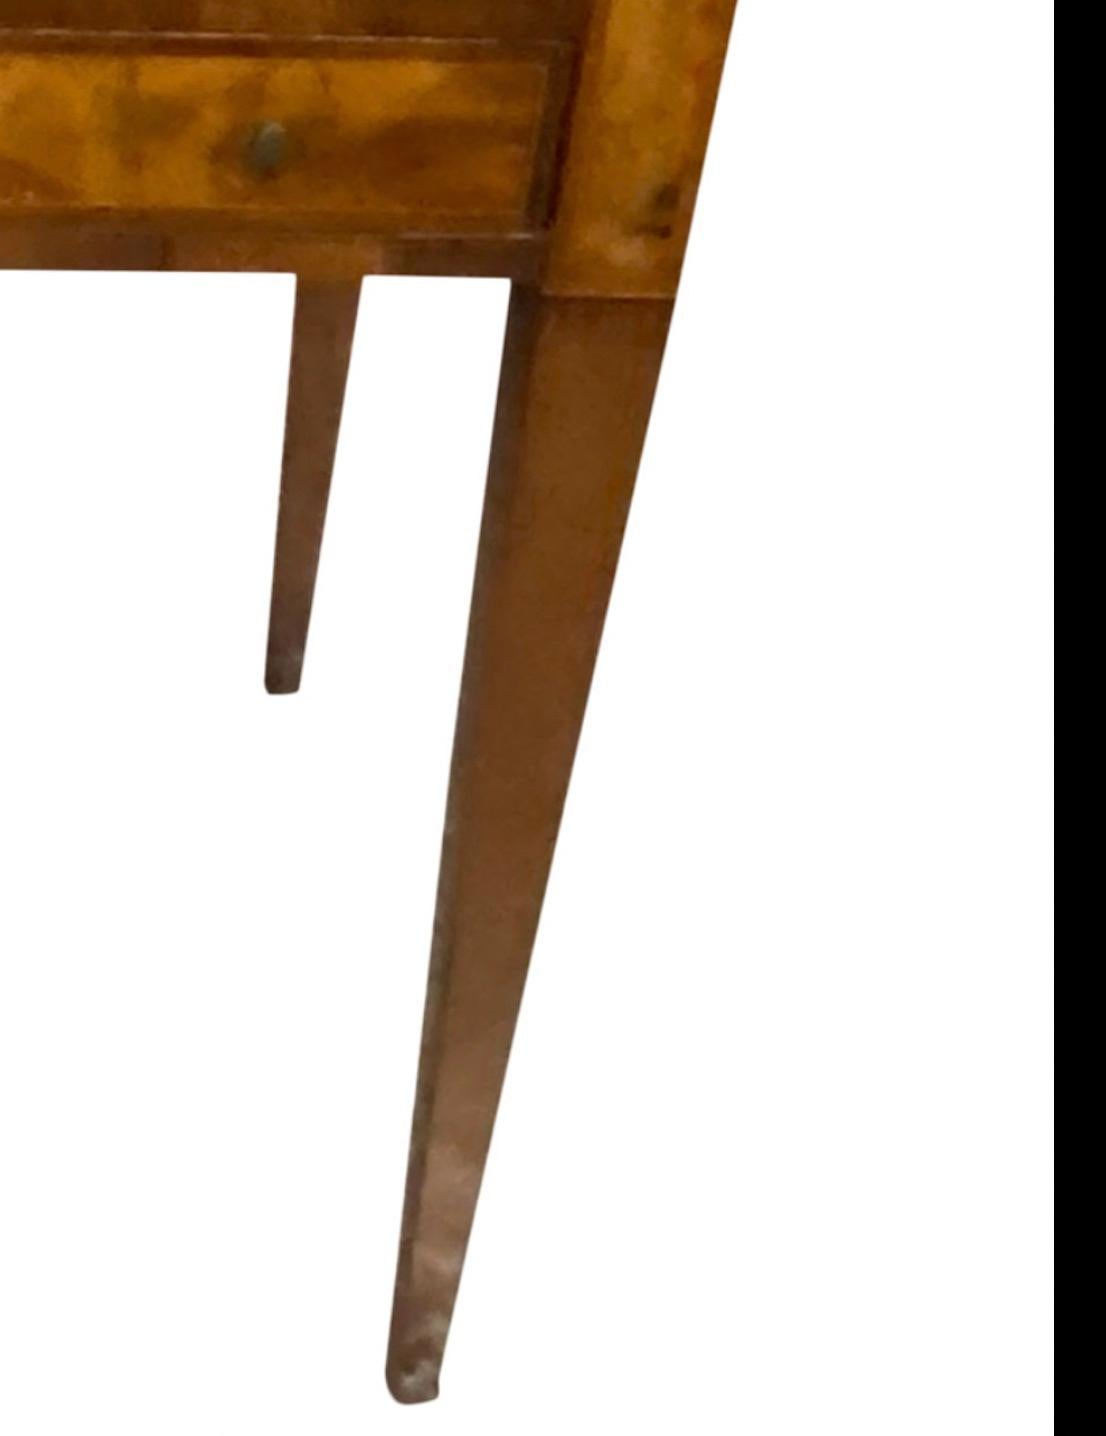 Hepplewhite Side Table with Burled Wood Top In Good Condition For Sale In Sag Harbor, NY